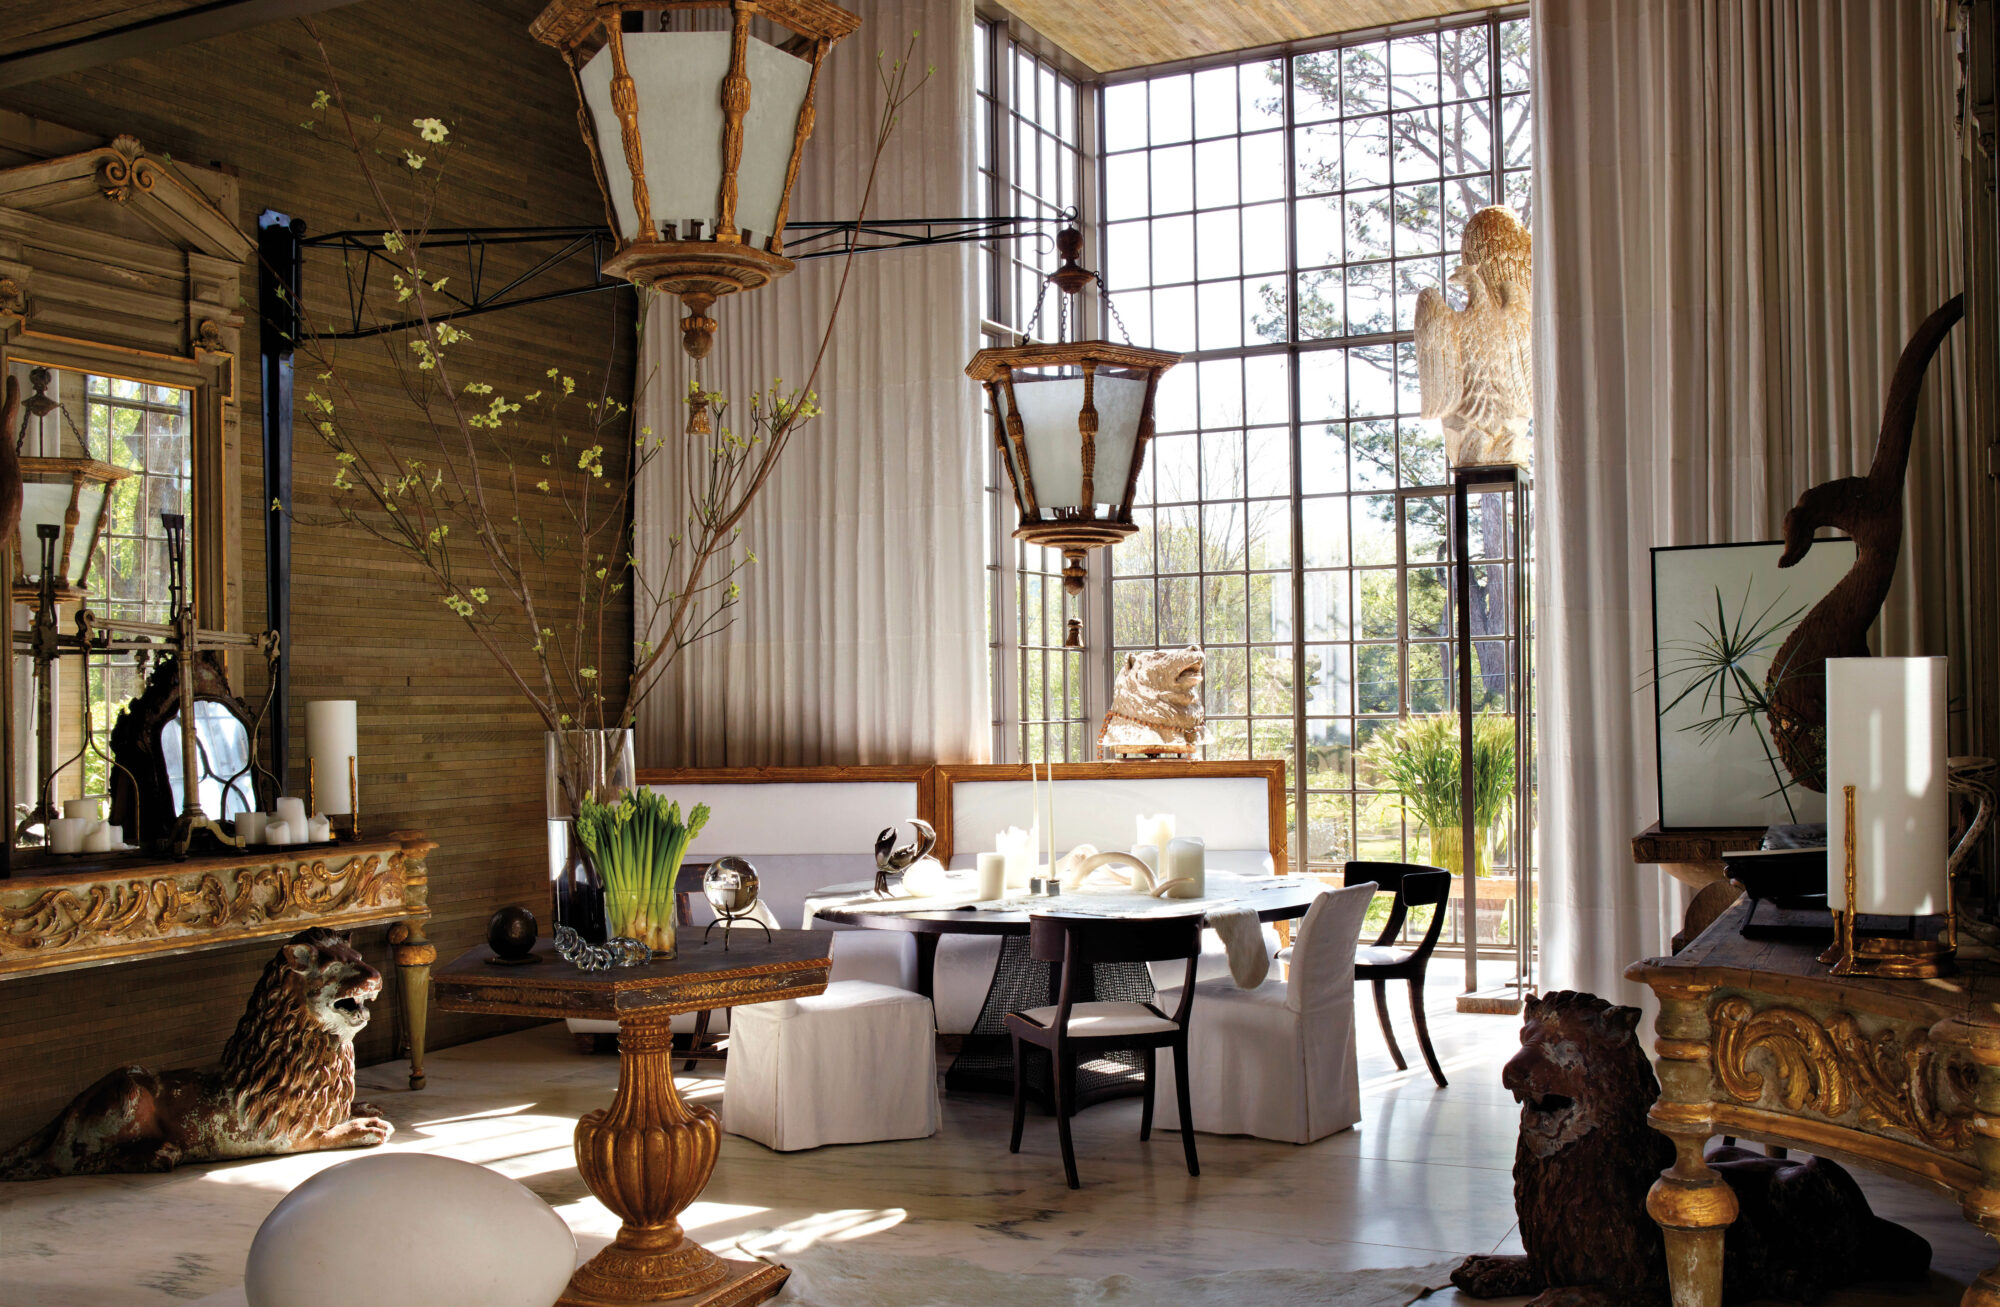 Southeast design book featuring dining area with ornate floor-to-ceiling windows and lion sculptures underneath